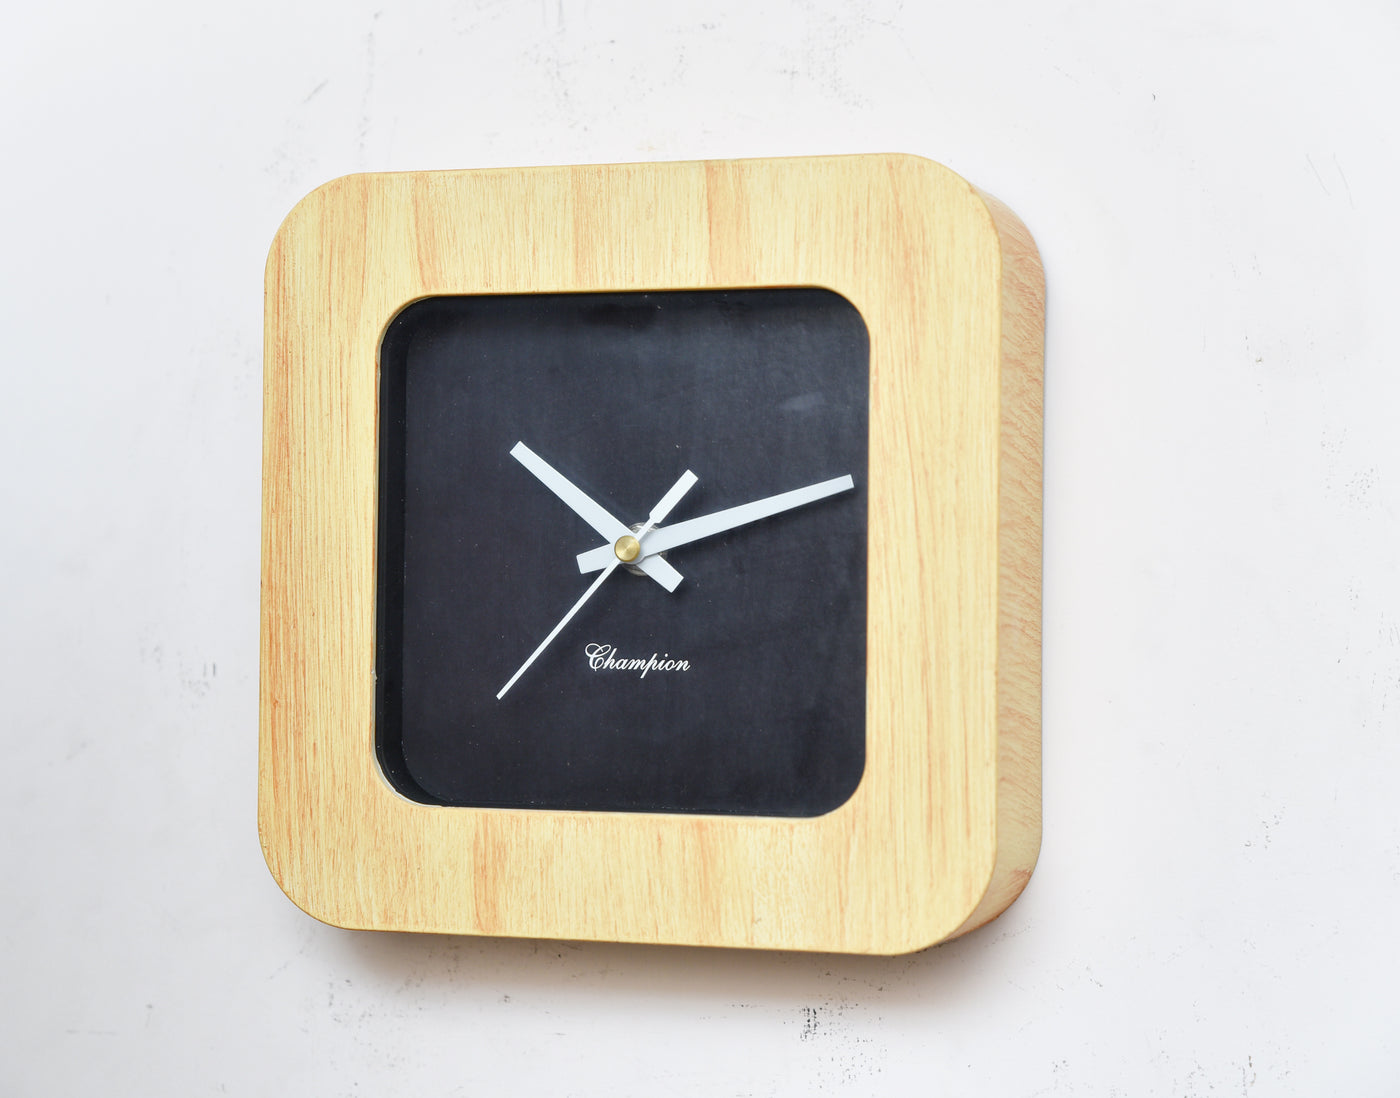 Champion Black Dial Light Ply-Wood Square Table Clock For Decor